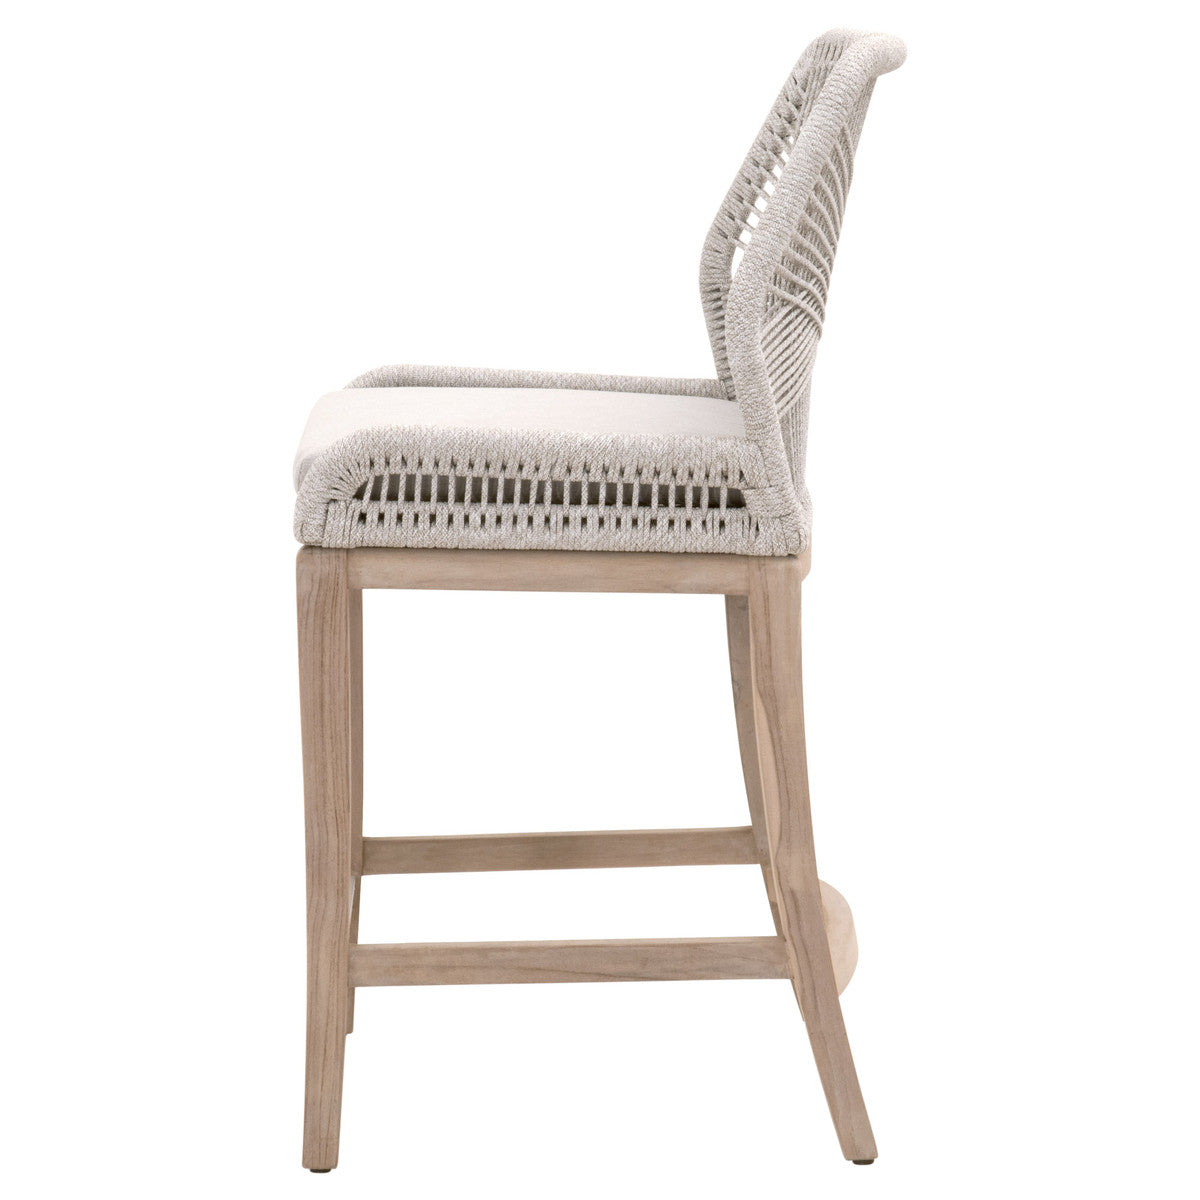 Loom Outdoor Counter Stool in Taupe & White Flat Rope, Performance Pumice, Gray Teak - 6808CS.WTA/PUM/GT